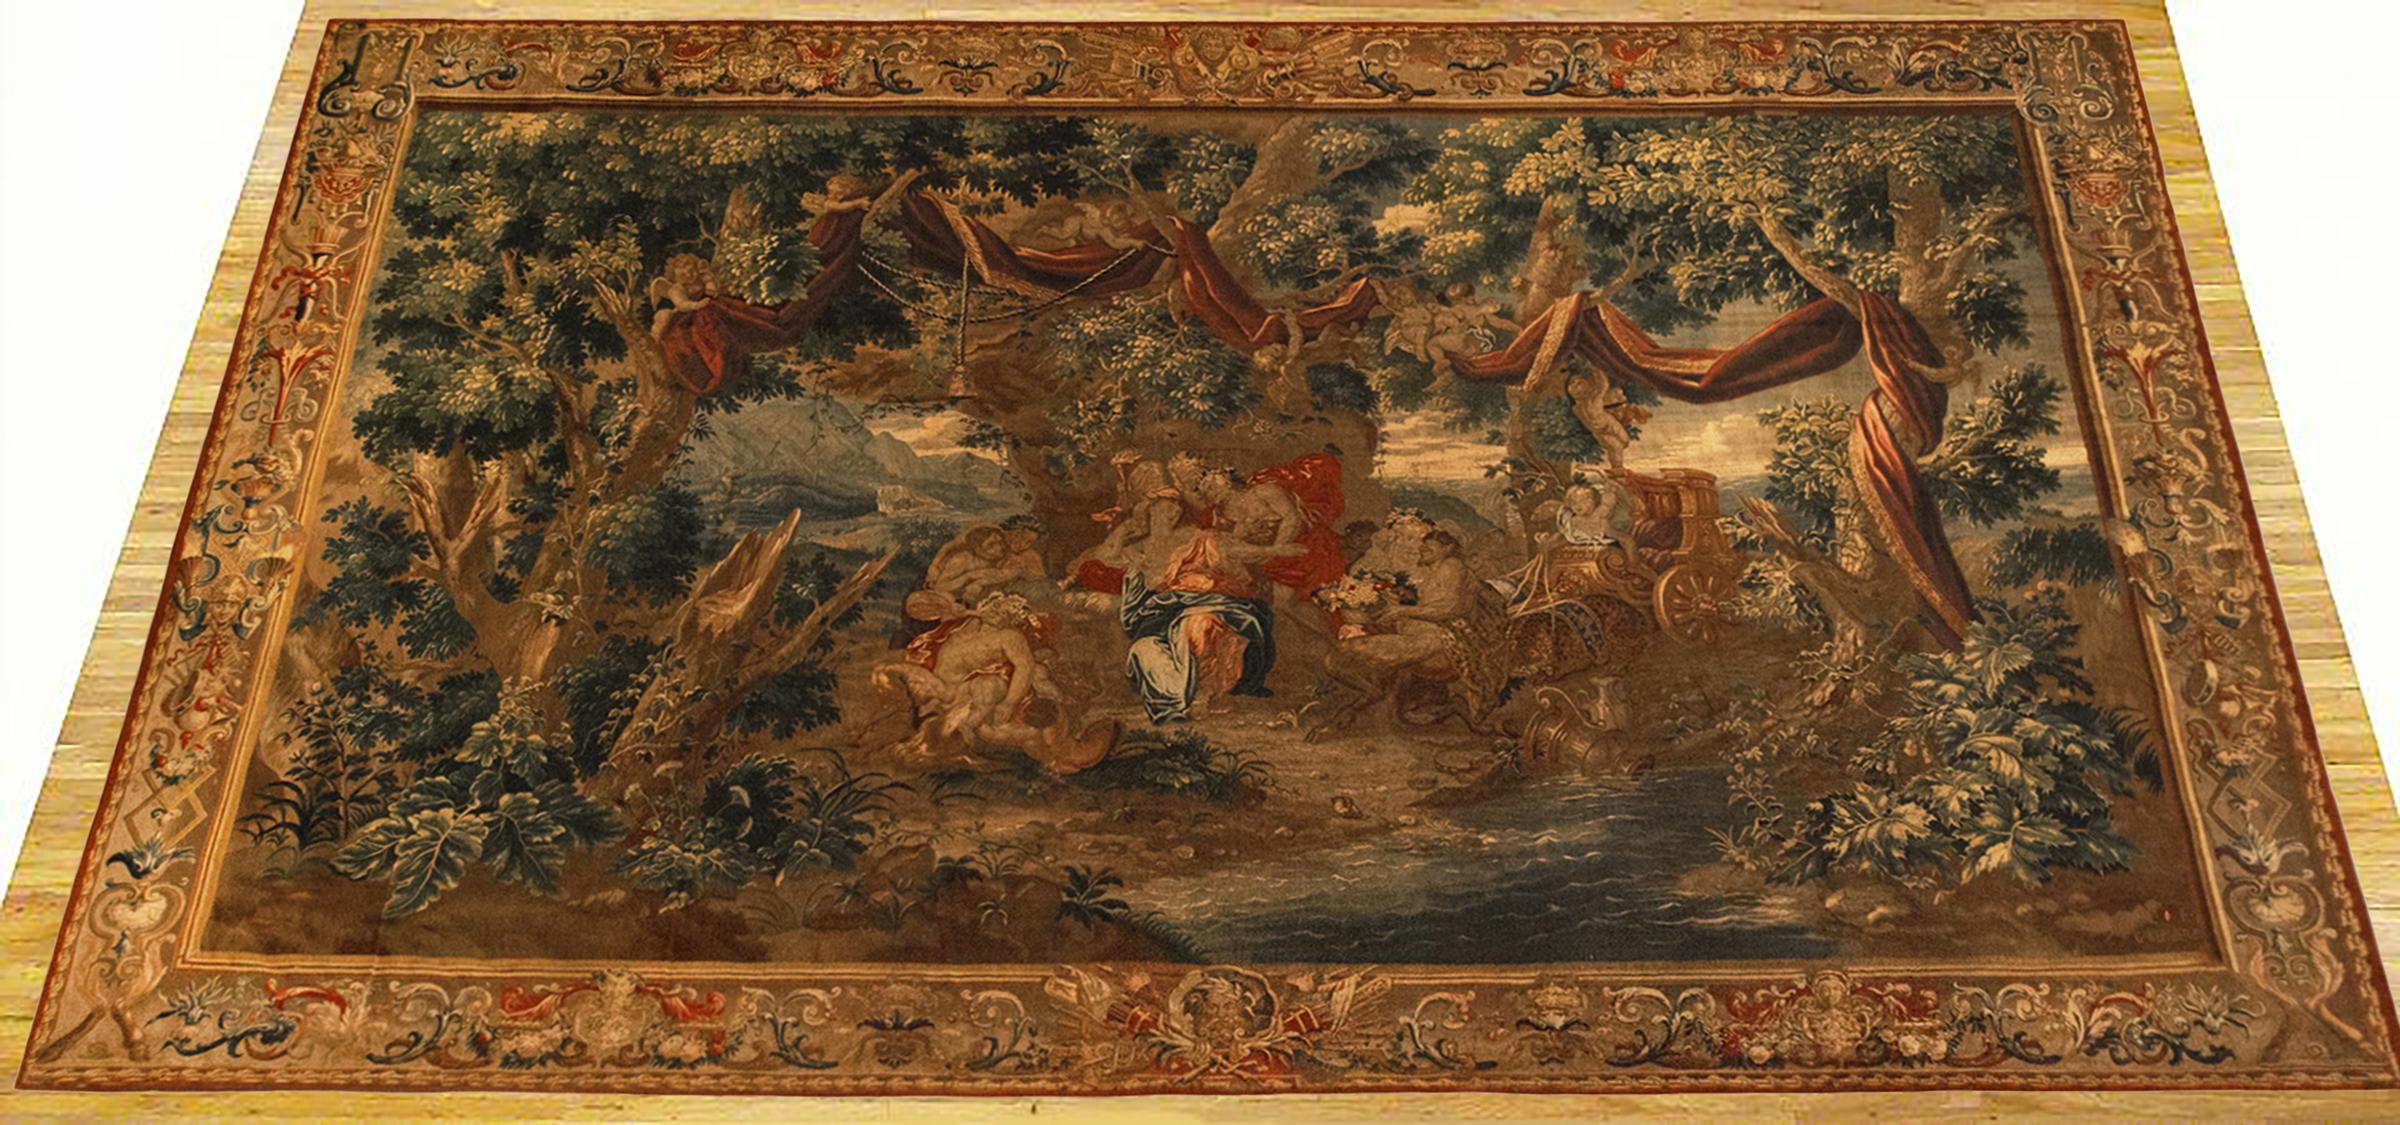 An 18th century French Felletin chinoiserie mythological tapestry, size 11'6